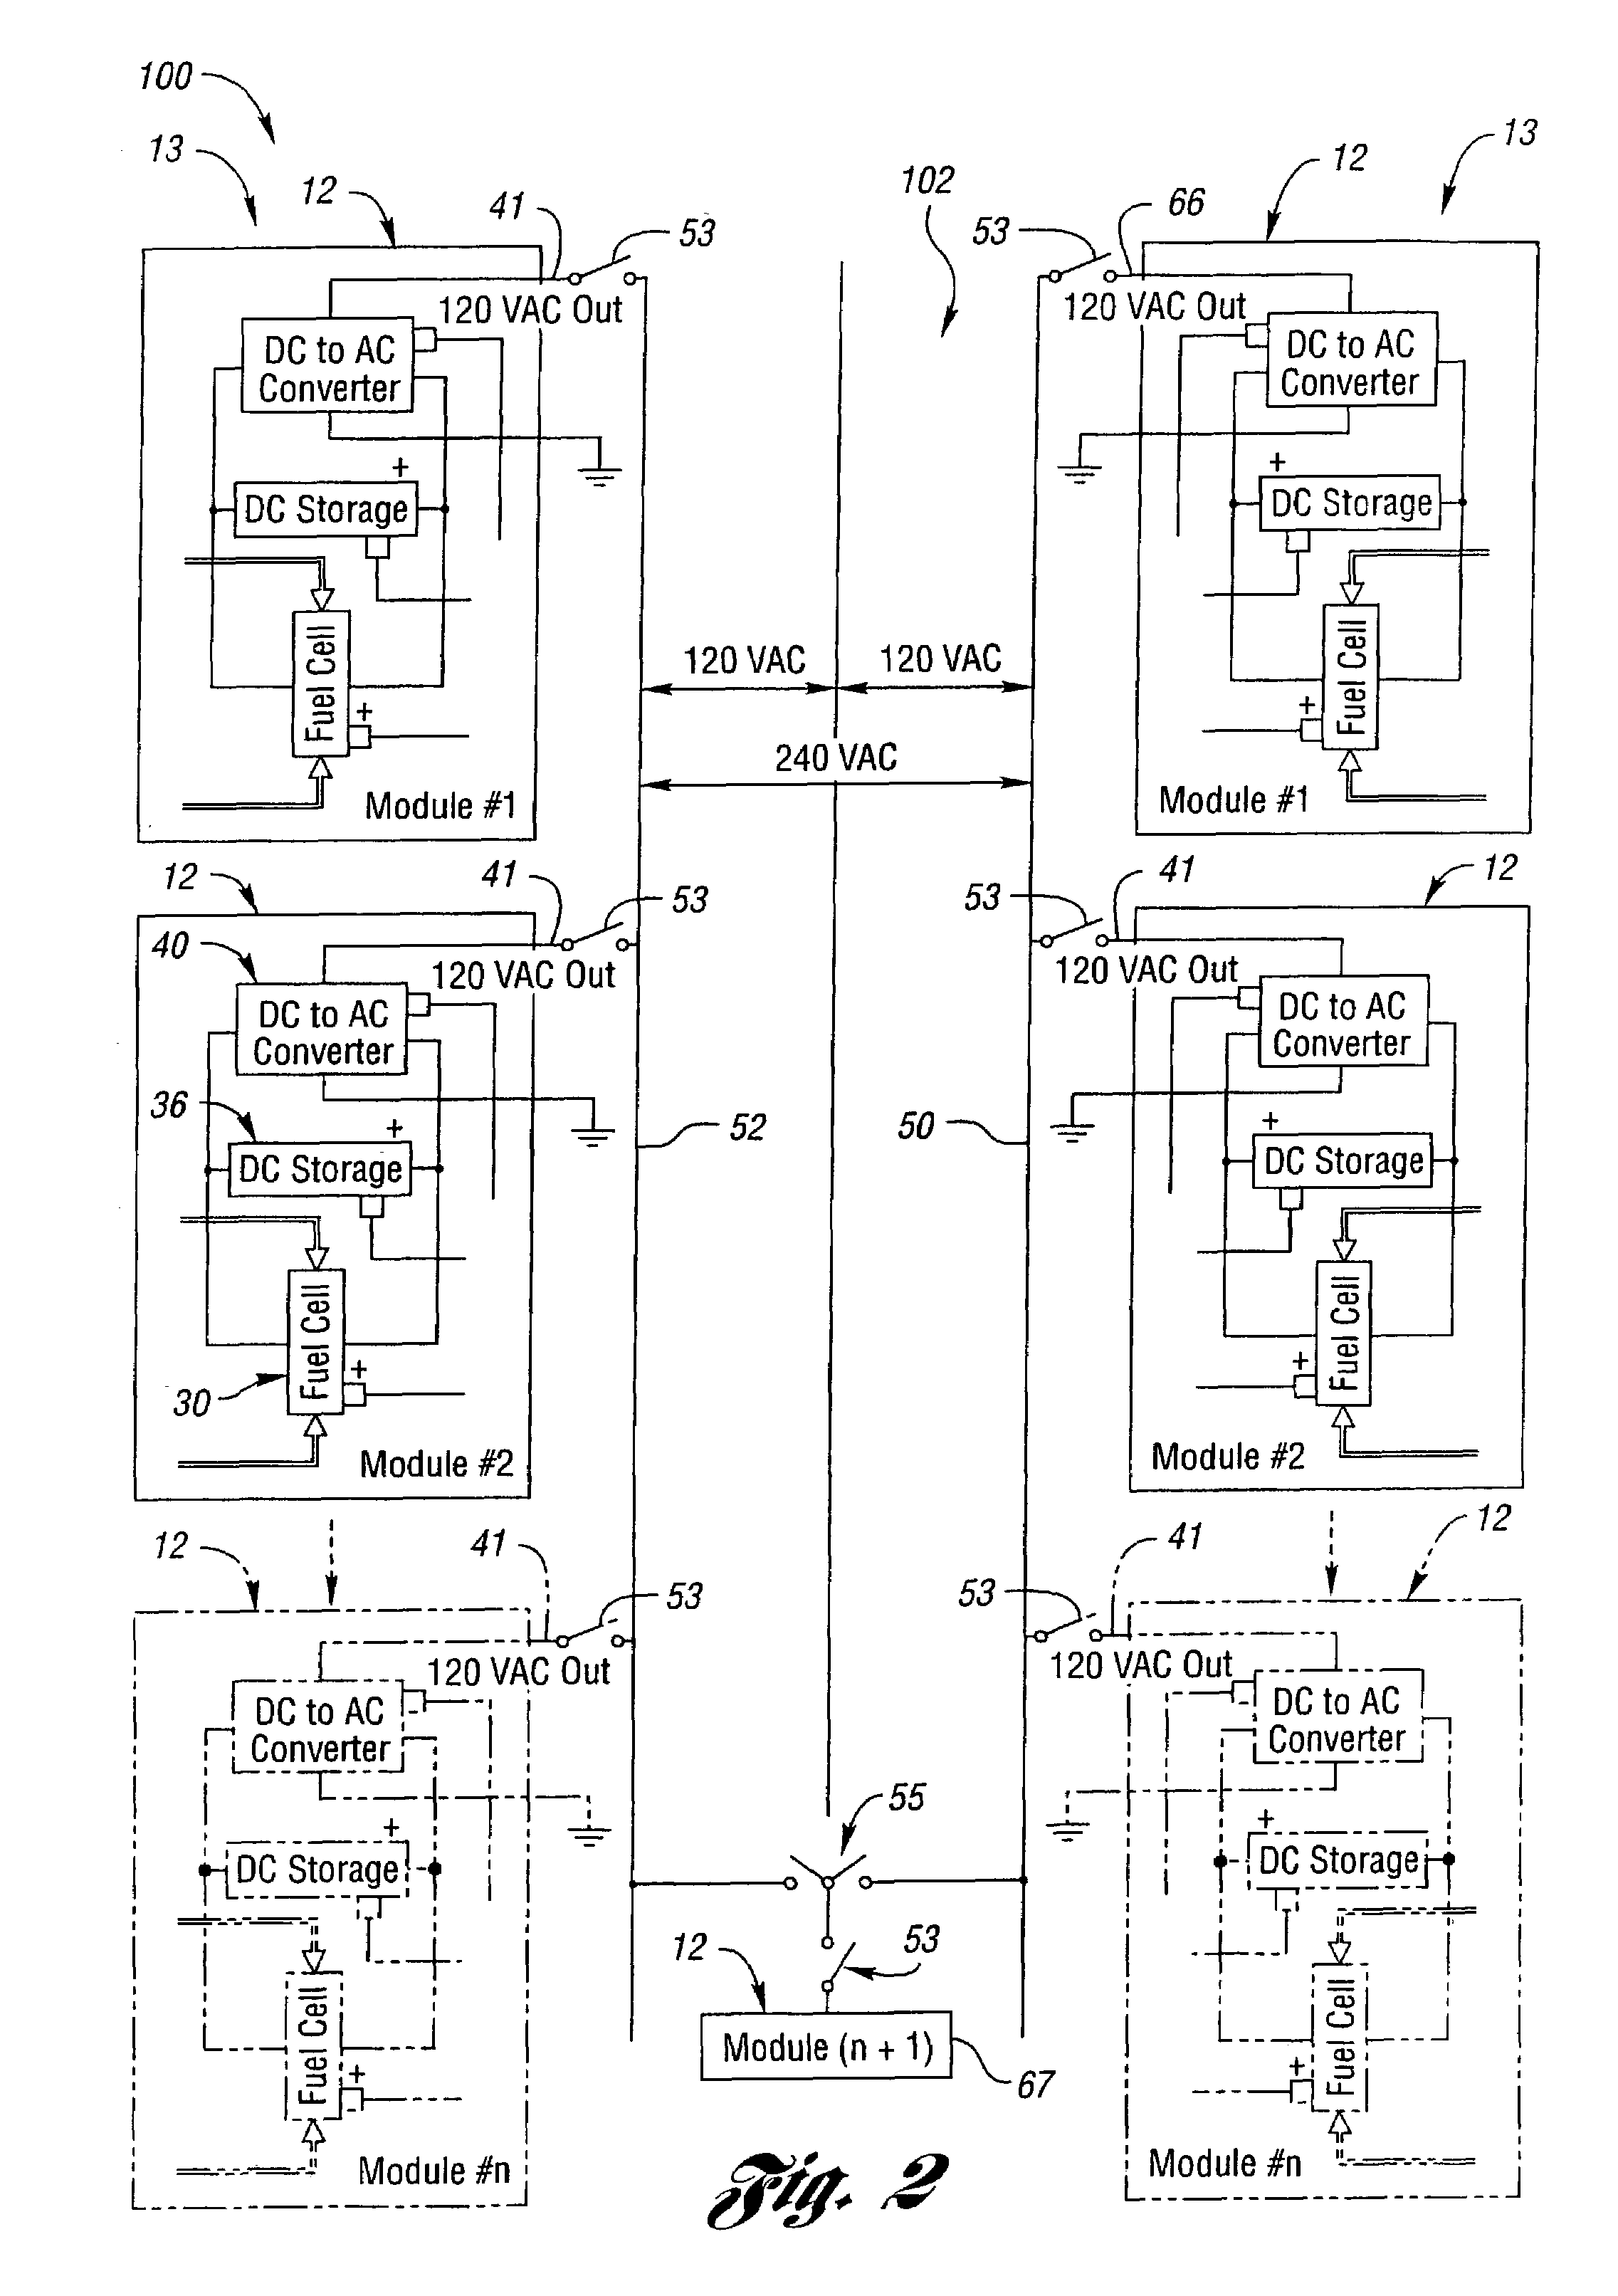 Variable fuel cell power system for generating electrical power